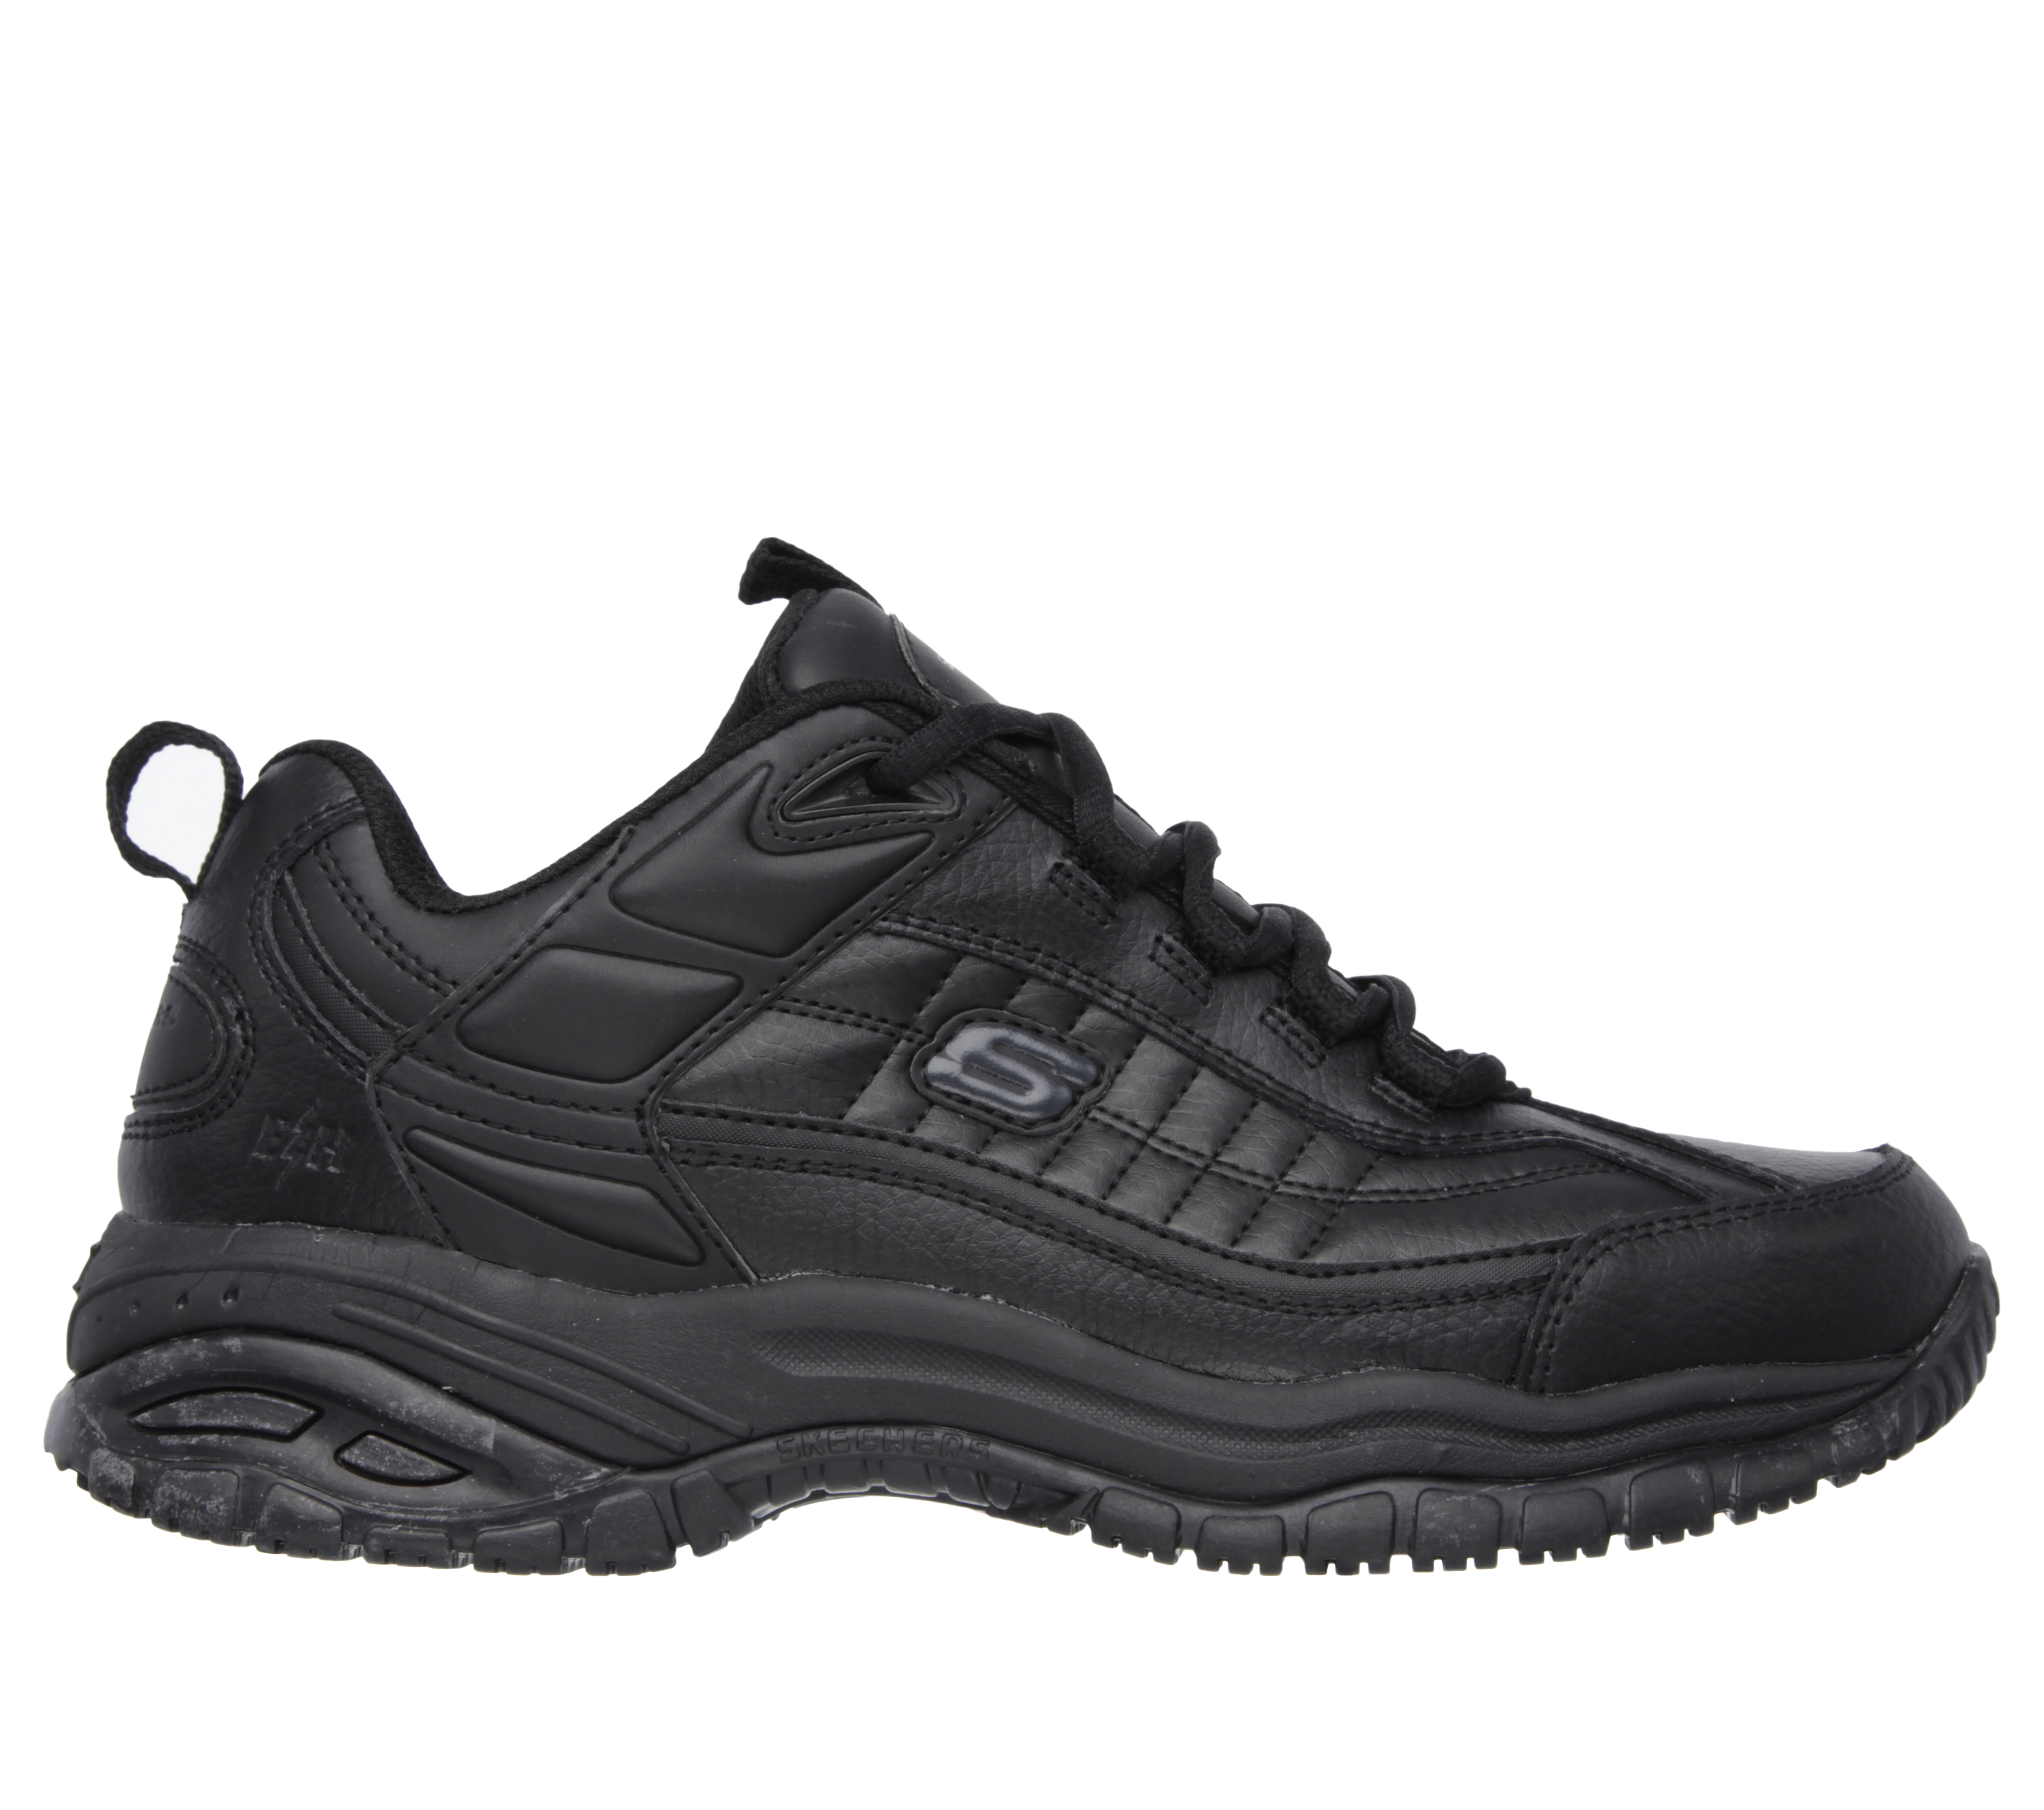 skechers soft stride review